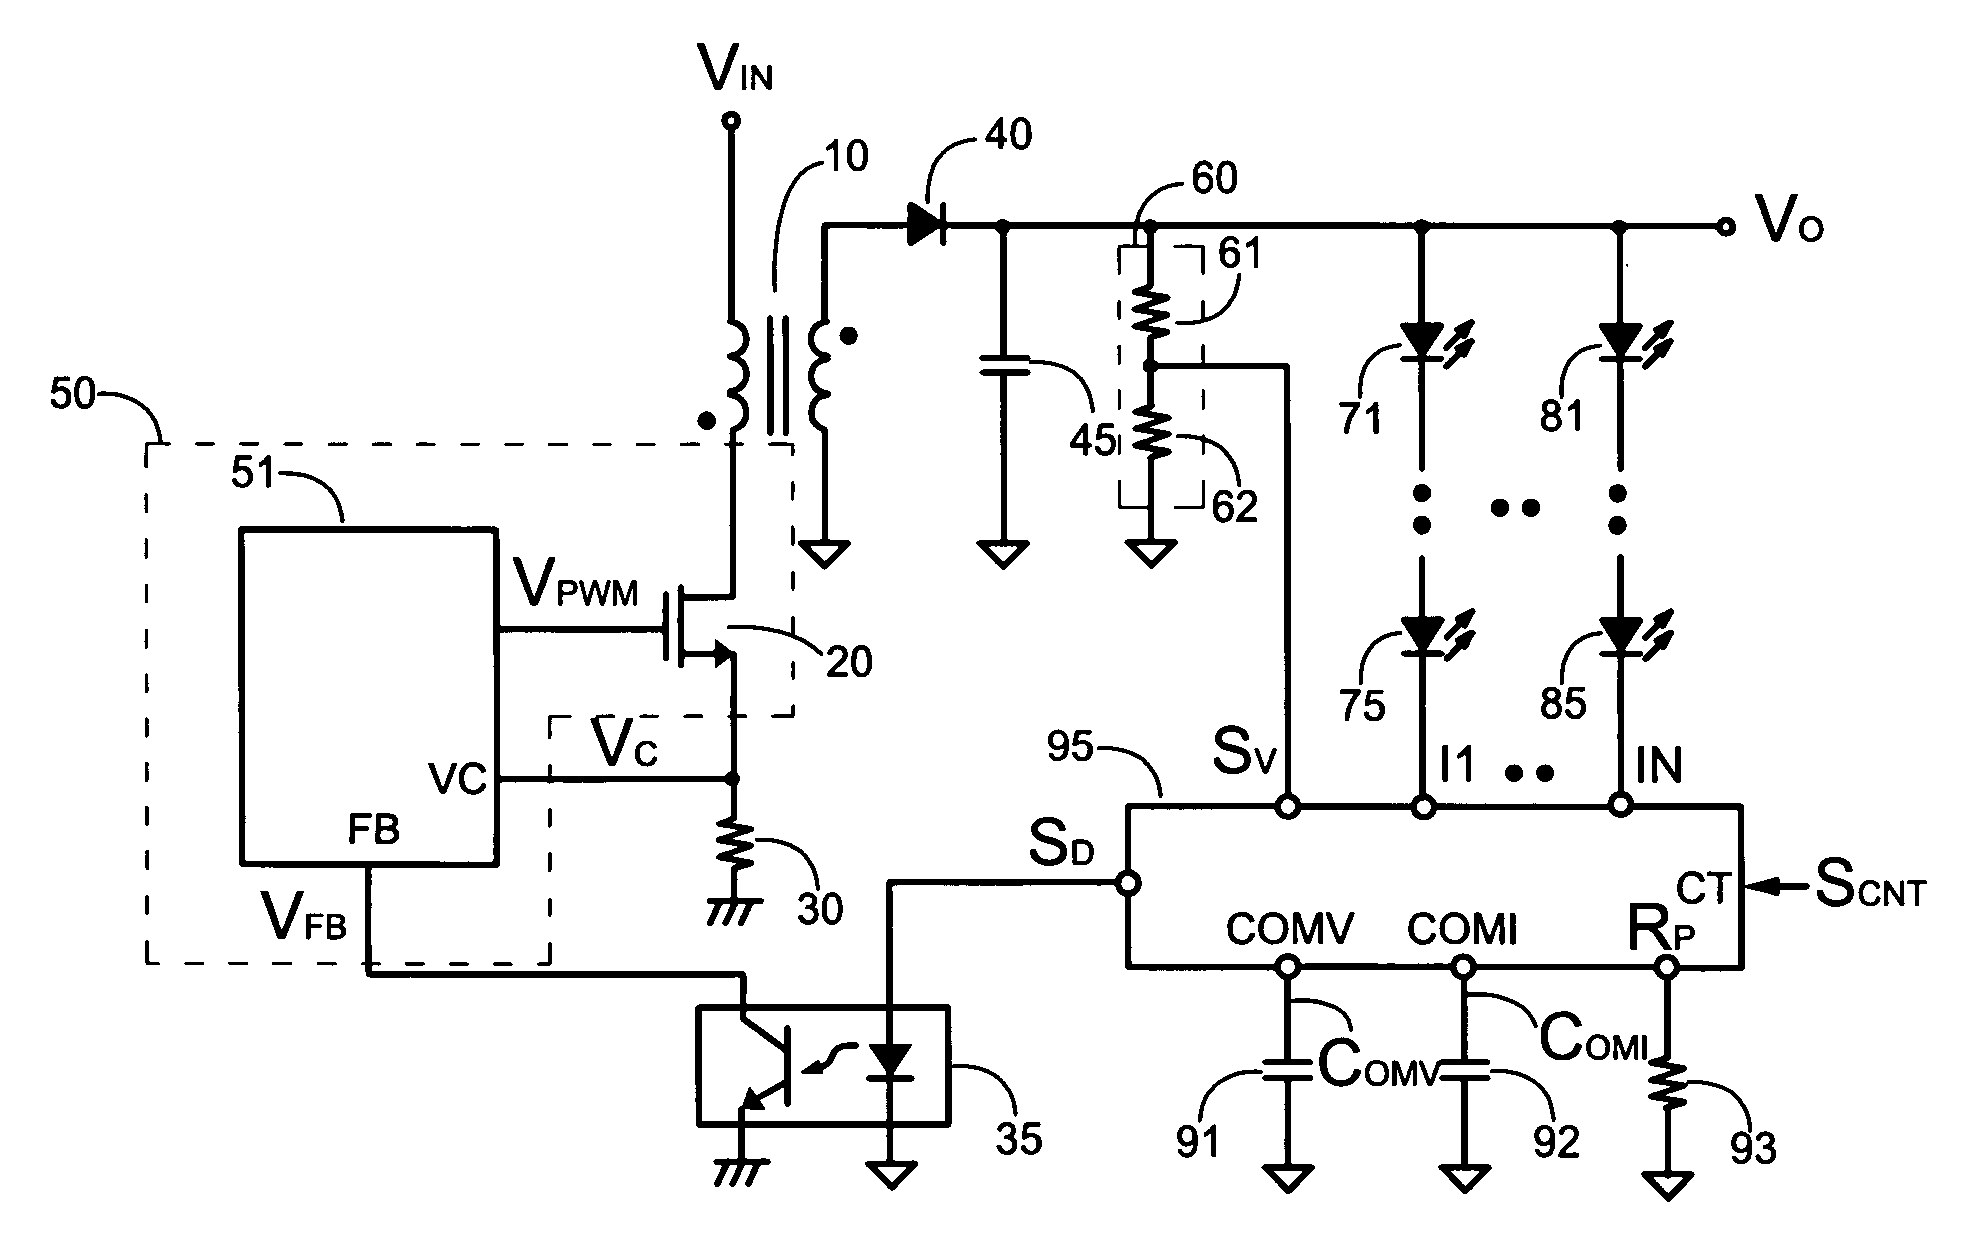 Controller of LED lighting to control the maximum voltage of leds and the maximum voltage across current sources